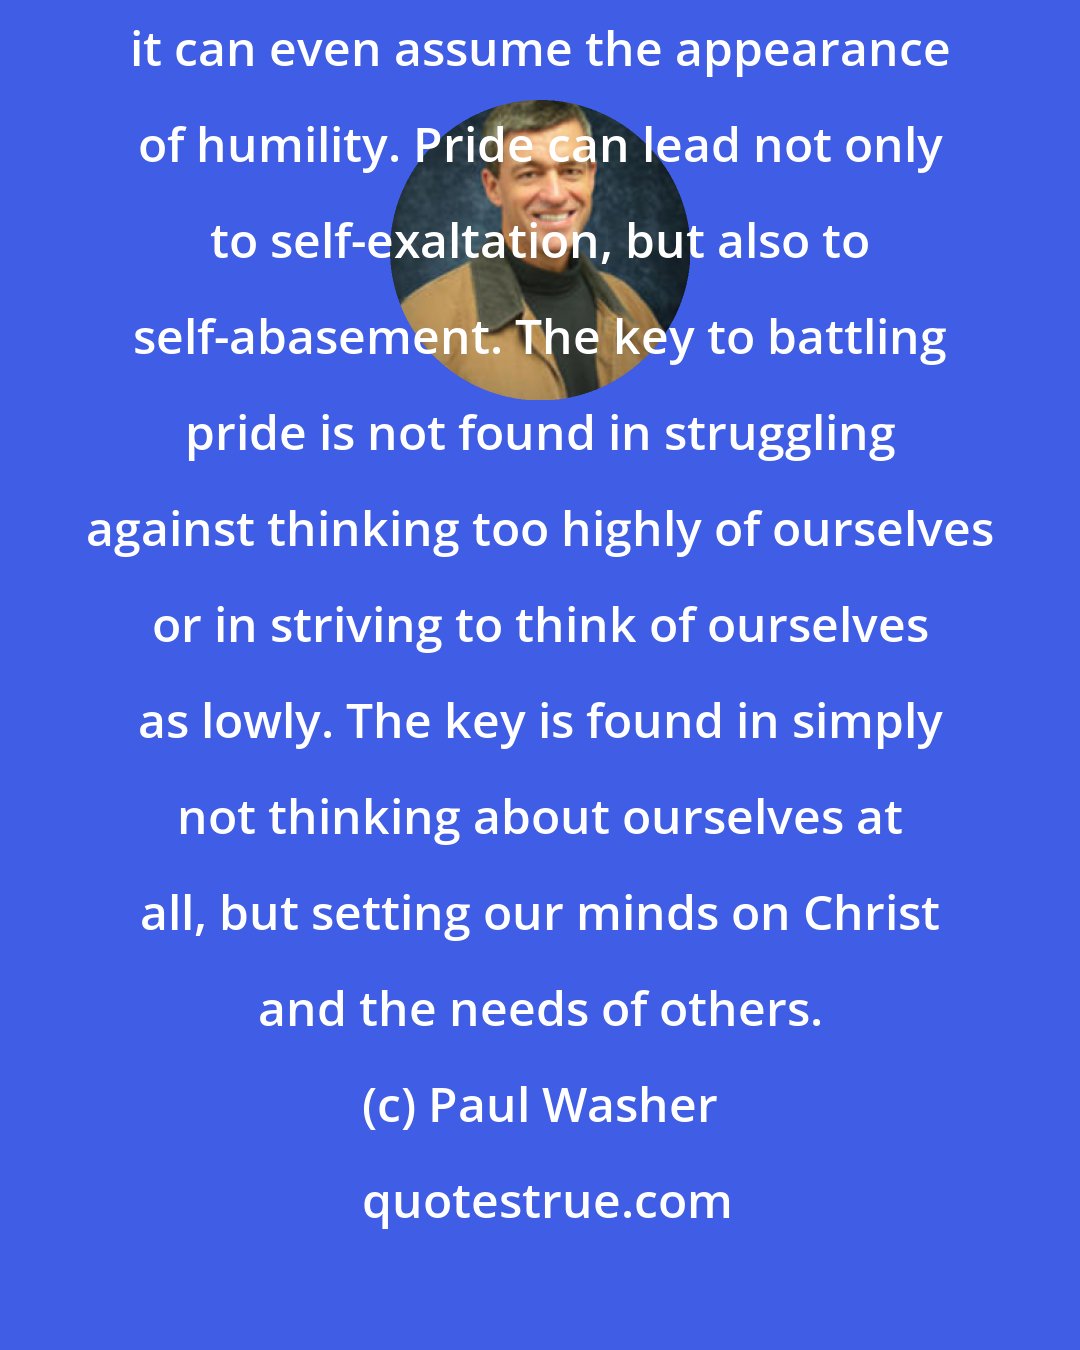 Paul Washer: Pride is a terrible and dangerous thing. It can take so many forms; it can even assume the appearance of humility. Pride can lead not only to self-exaltation, but also to self-abasement. The key to battling pride is not found in struggling against thinking too highly of ourselves or in striving to think of ourselves as lowly. The key is found in simply not thinking about ourselves at all, but setting our minds on Christ and the needs of others.